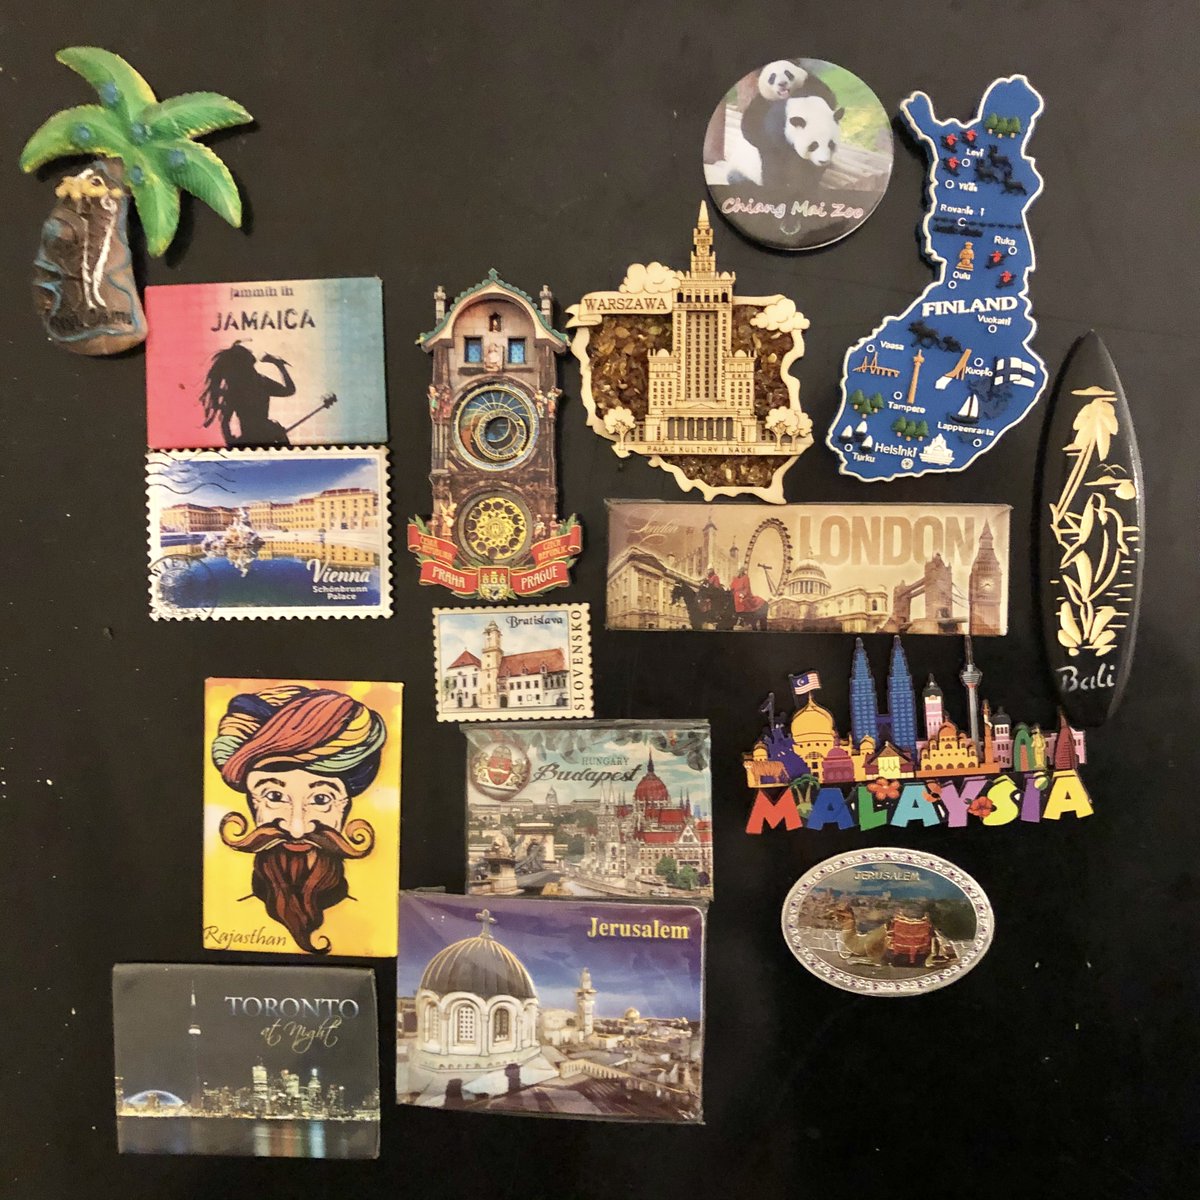 A few travel fridge magnets we have collected in the past few years. Have you hit any of these destinations?

#GapYear #travelblog #travelwithkids #travelingwithkids #travelfamily #kidswhotravel #kidswhoadventure #kidswhoexplore #indianamericankids #desikids #indiankids